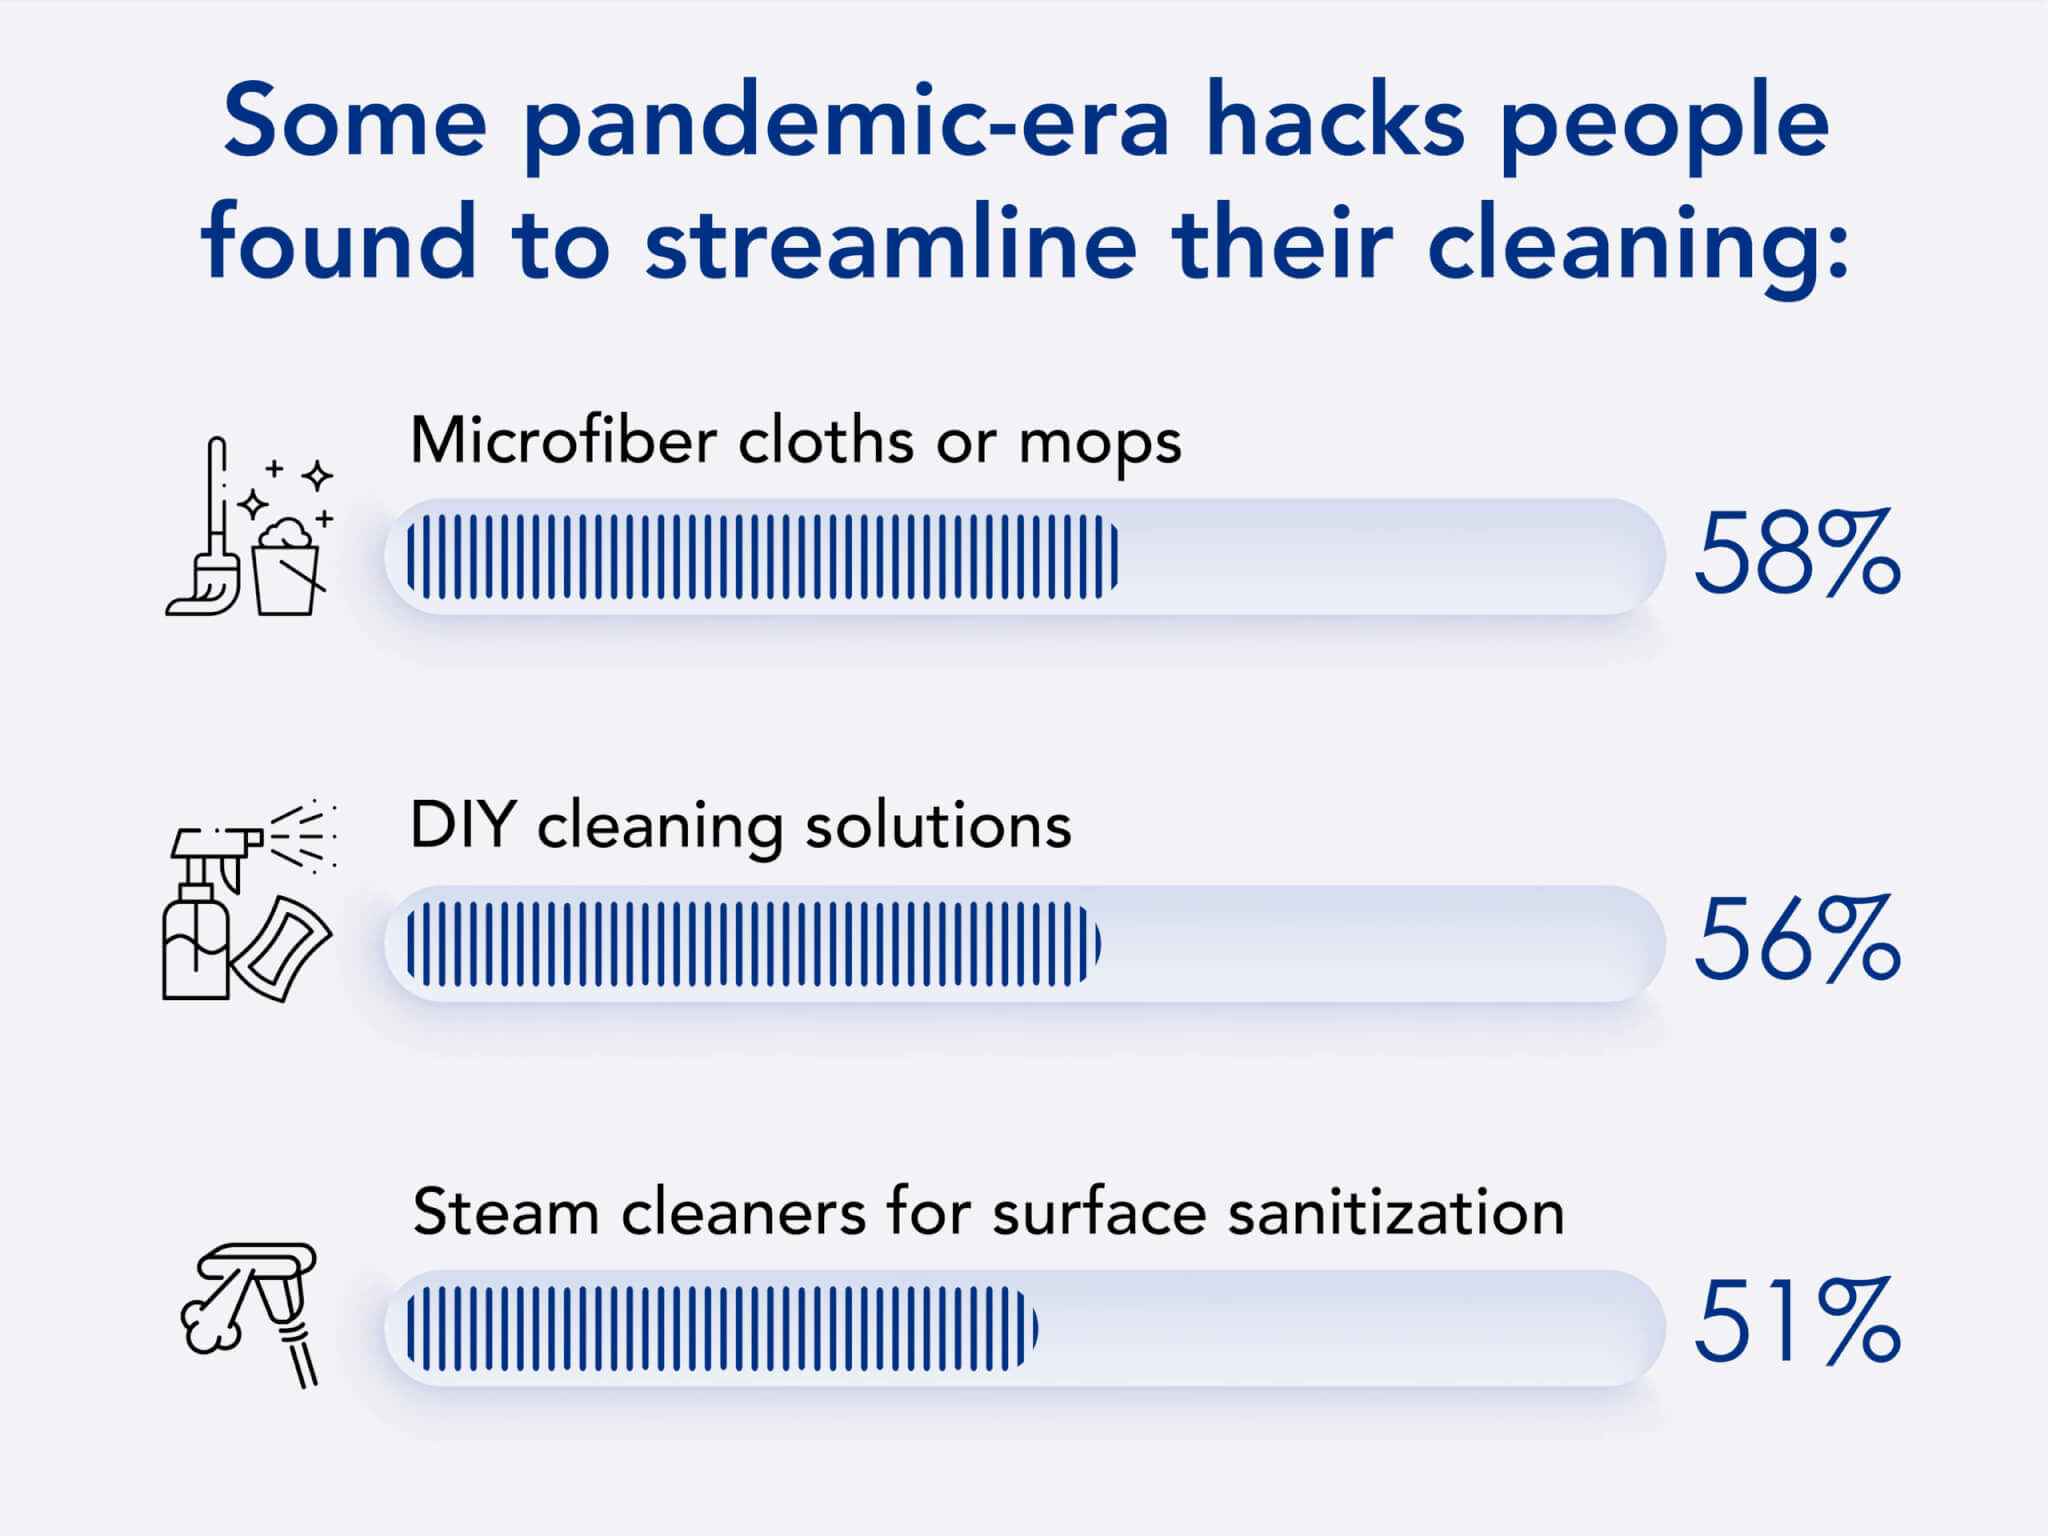 Infographic about cleaning hacks people used during the pandemic.